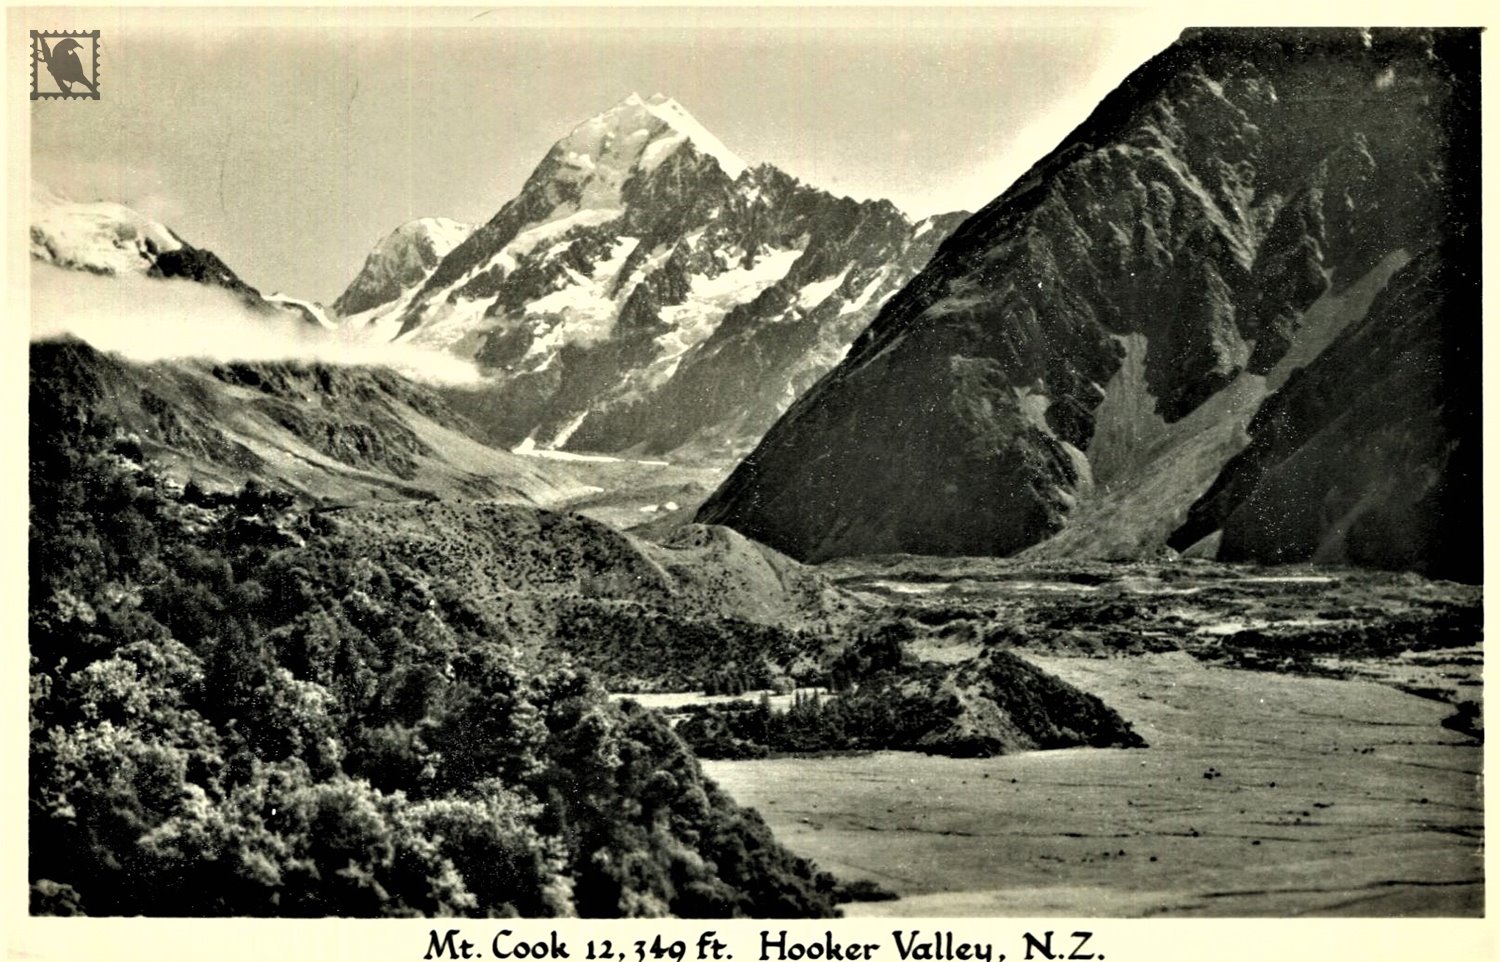 Mount Cook - View from the Hooker Valley